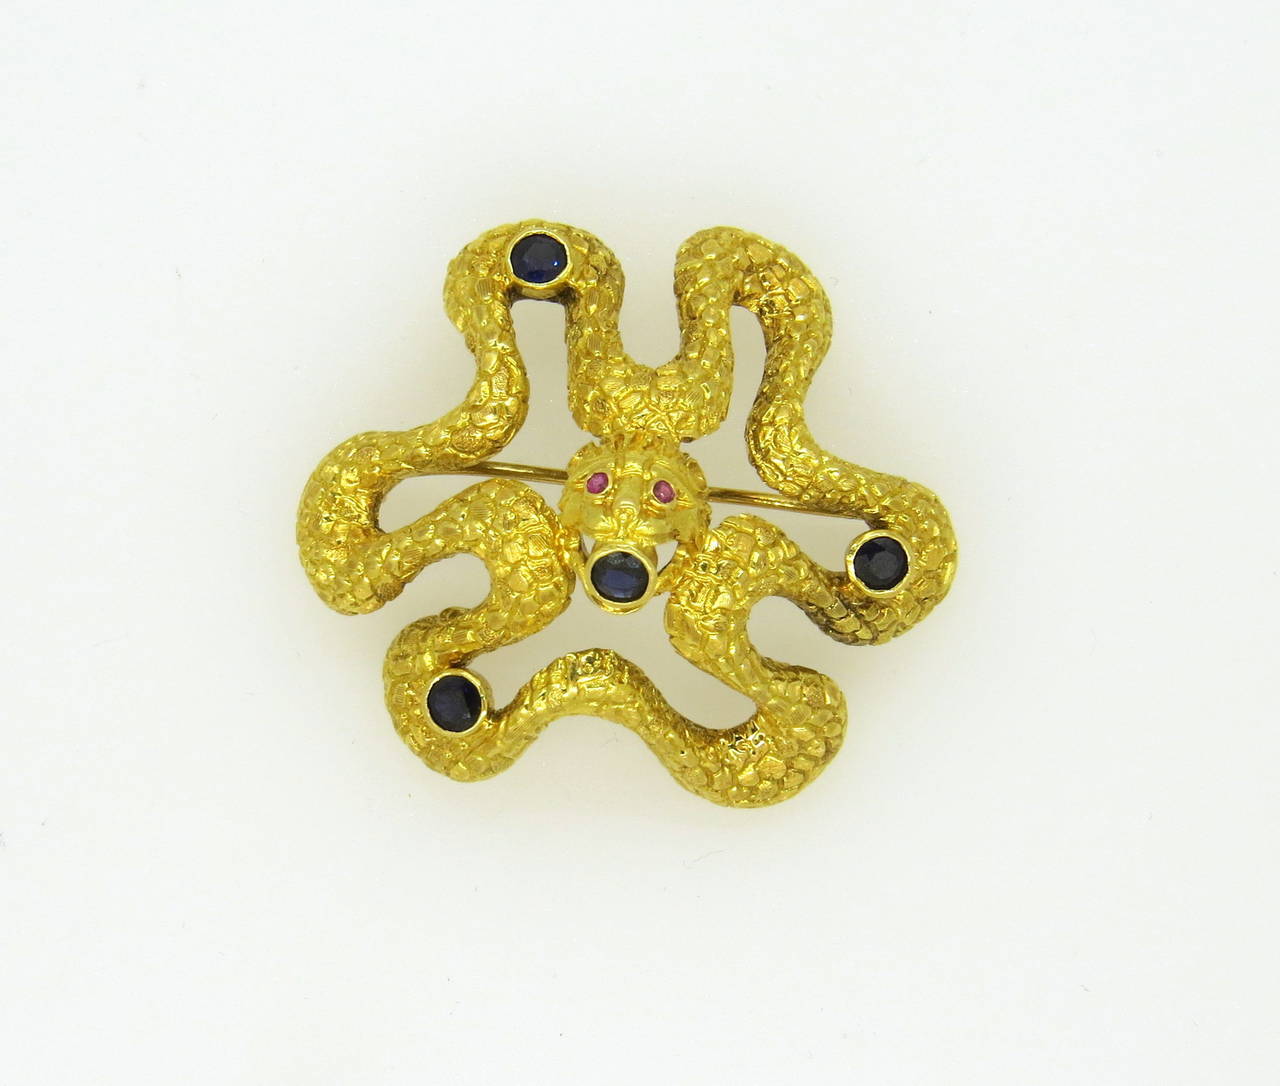 Ilias Lalaounis Greece 18k gold serpent snake brooch, decorated with four sapphires and two ruby eyes. Brooch is 45mm x 40mm. Marked Greece, K18,Ilias Lalaounis. weight of the piece - 24.2 gr